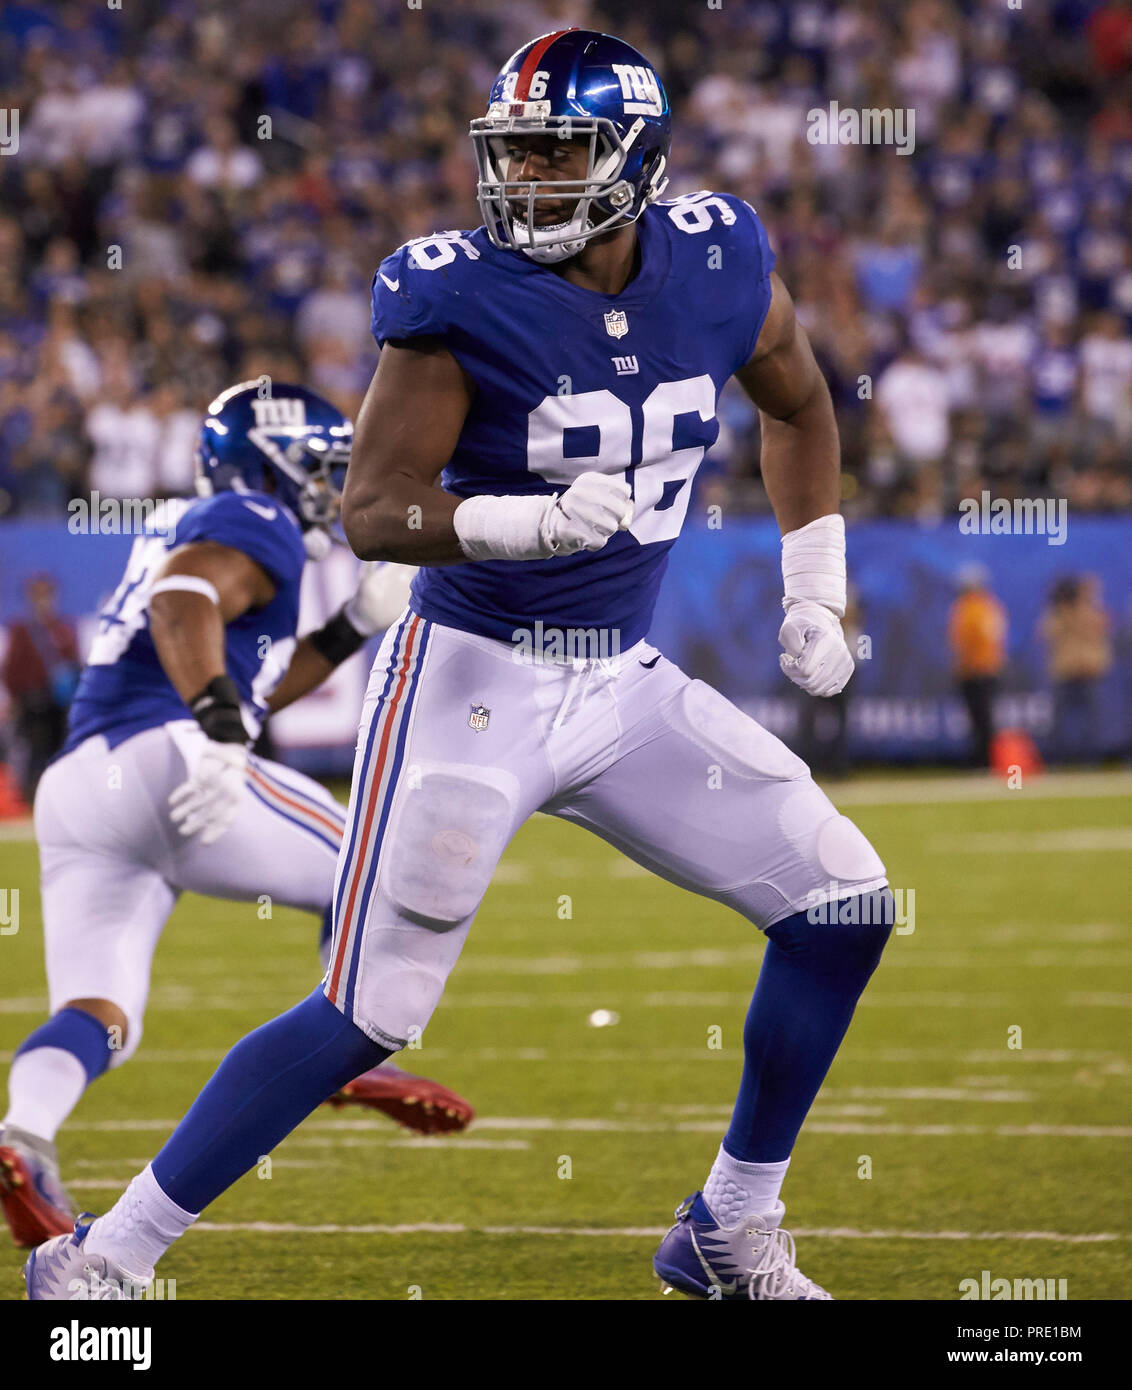 East Rutherford, New Jersey, USA. 1st Oct, 2018. New York Giants linebacker  Kareem Martin (96) during a NFL game between the New Orlean Saints and the New  York Giants at MetLife Stadium